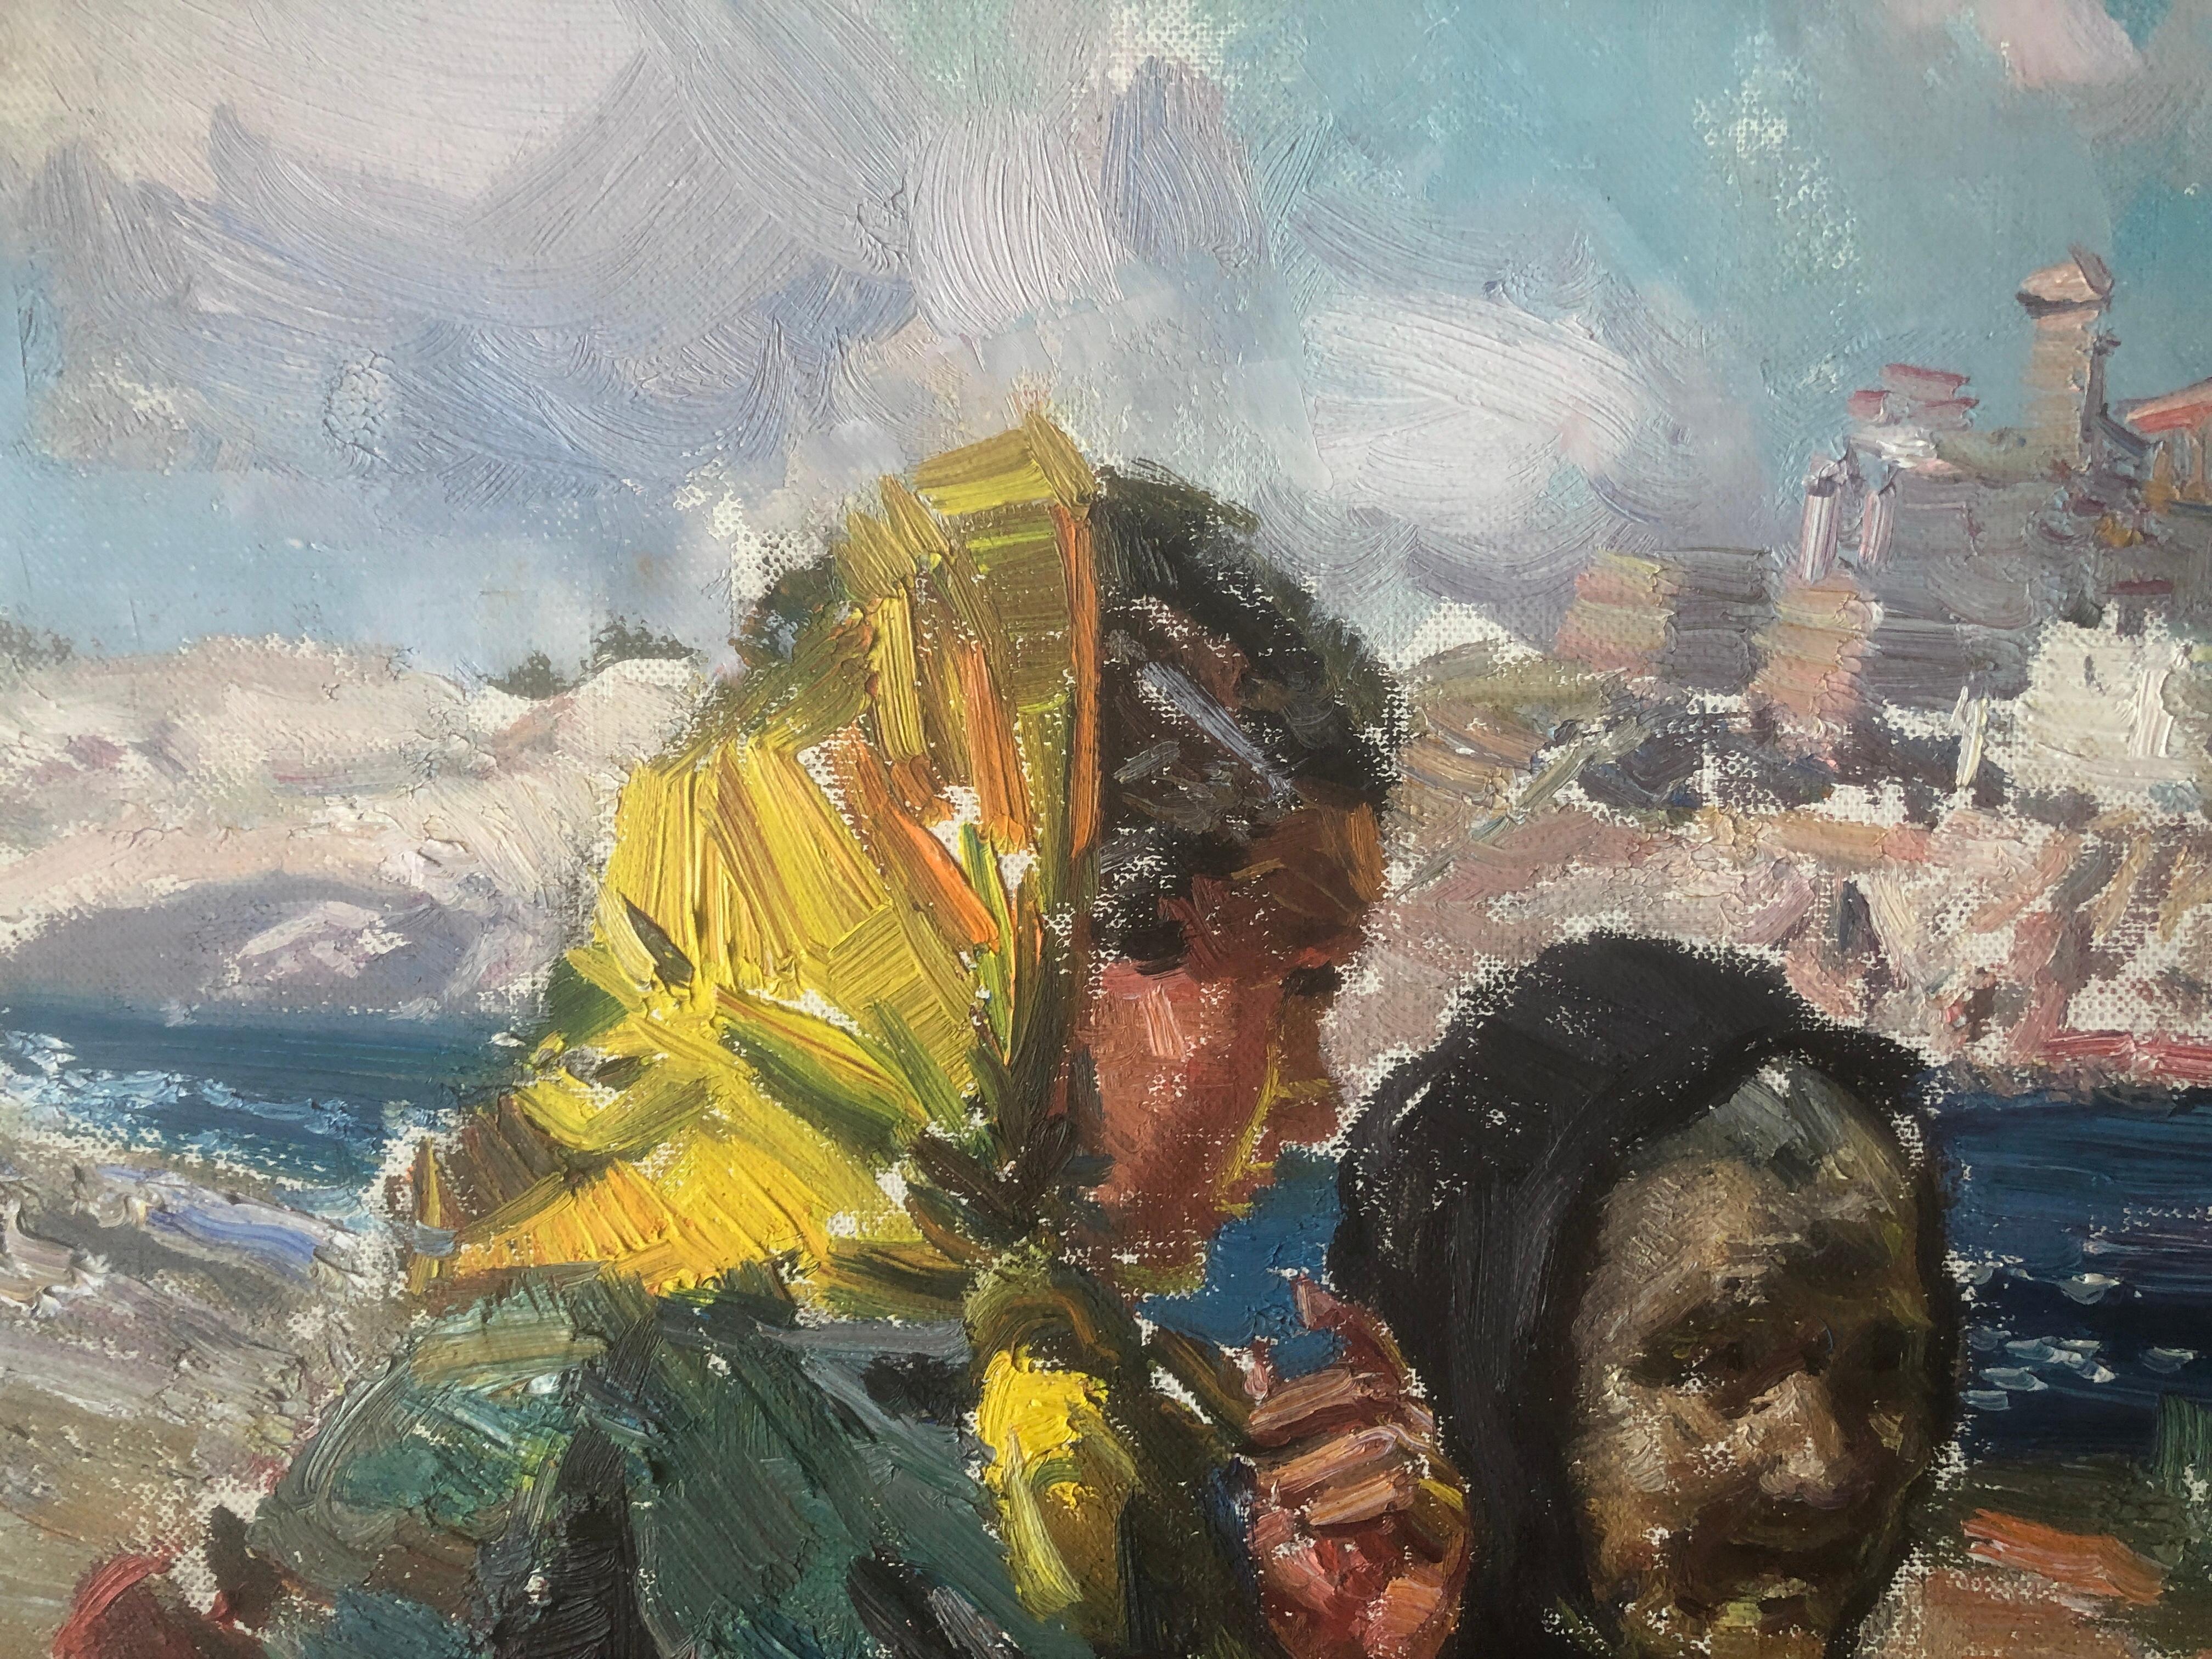 Women from ibiza Spain oil on canvas painting spanish seascape mediterranean - Post-Impressionist Painting by Ignacio Gil Sala